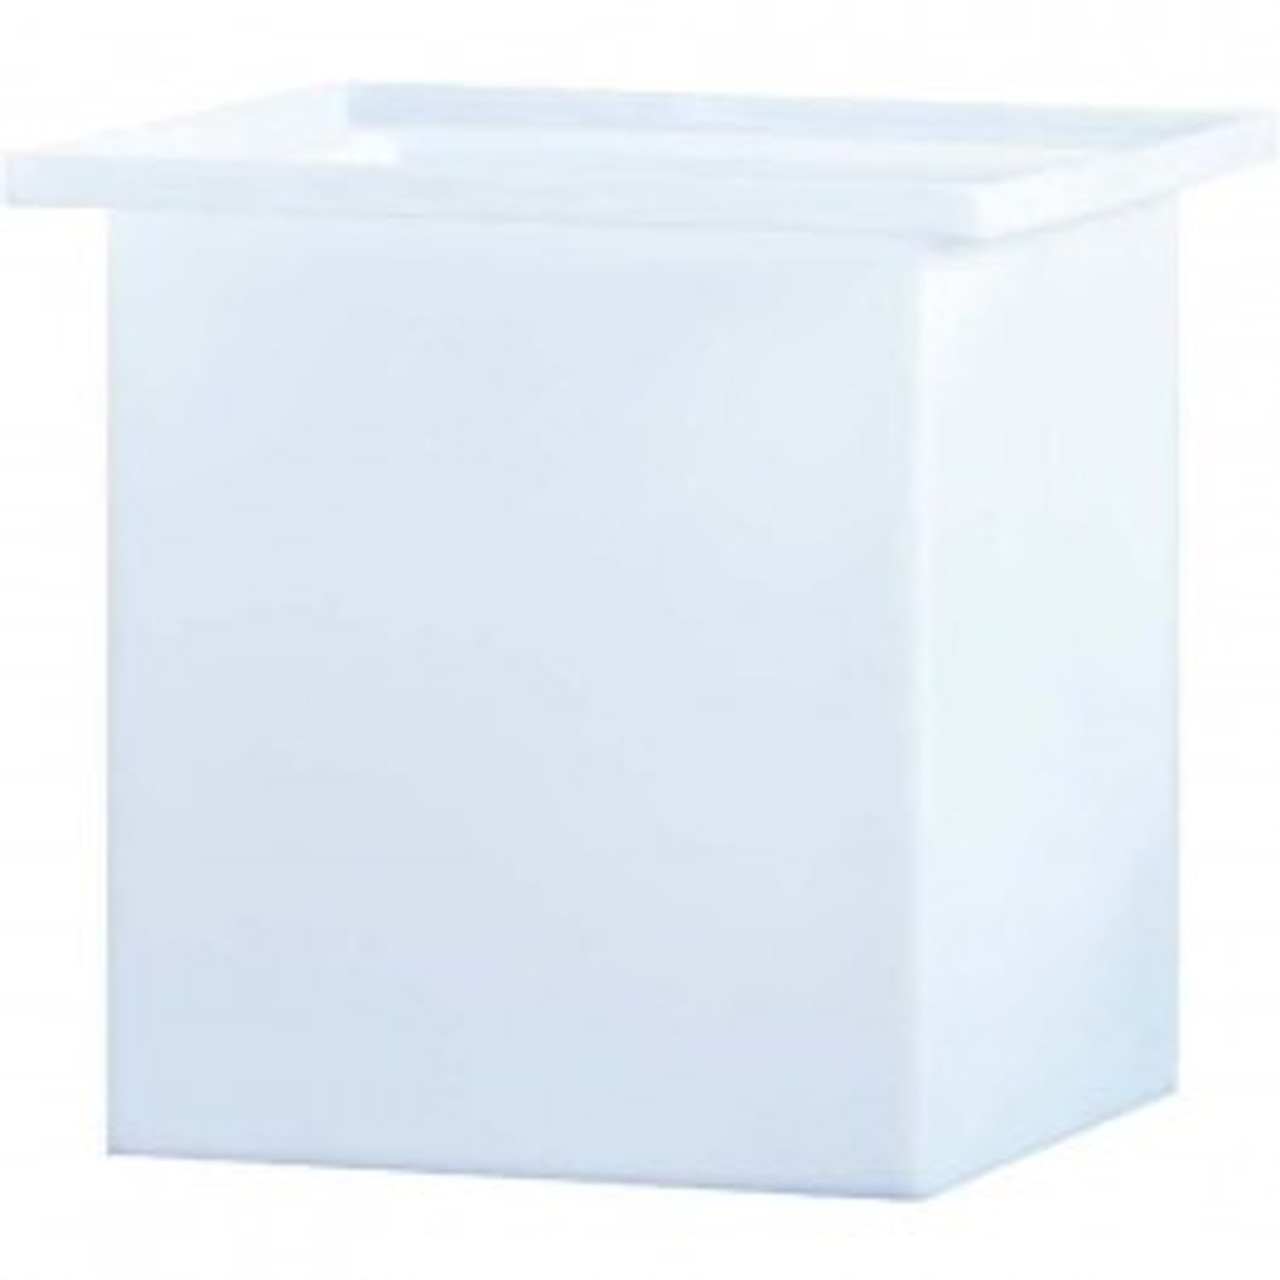 An image of a 45 Gallon PE Chem-Tainer White Rectangular Open Top Tank | R123030A